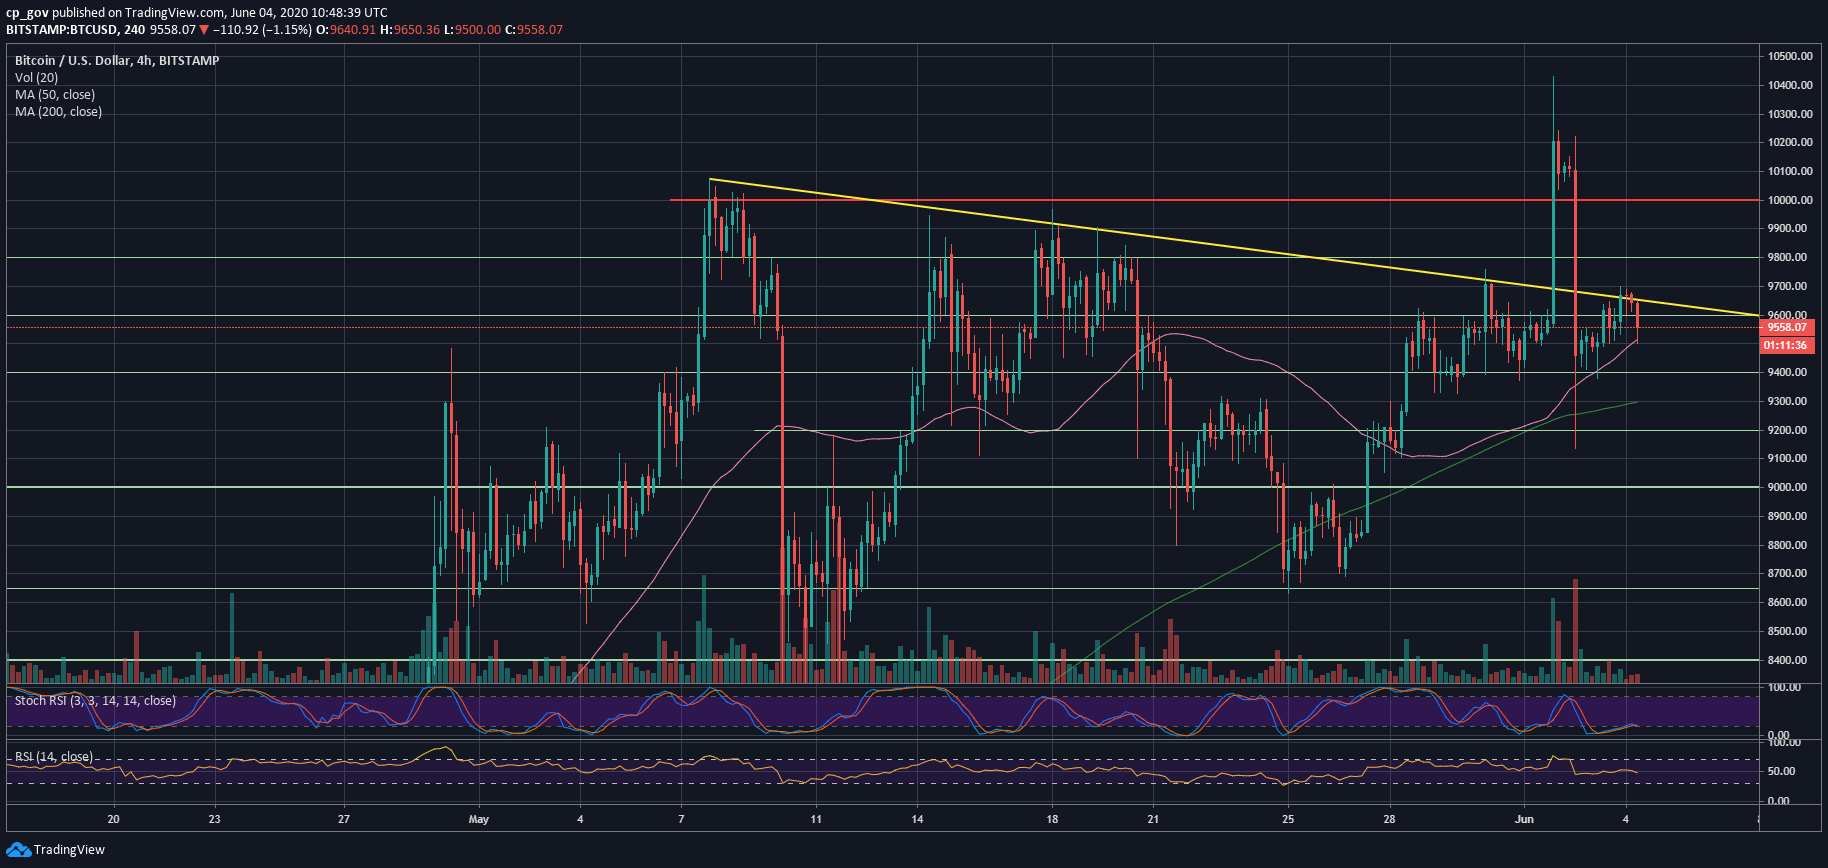 Bitcoin Price Analysis: $9000 Incoming? BTC’s After Another Failure To Break Critical Resistance